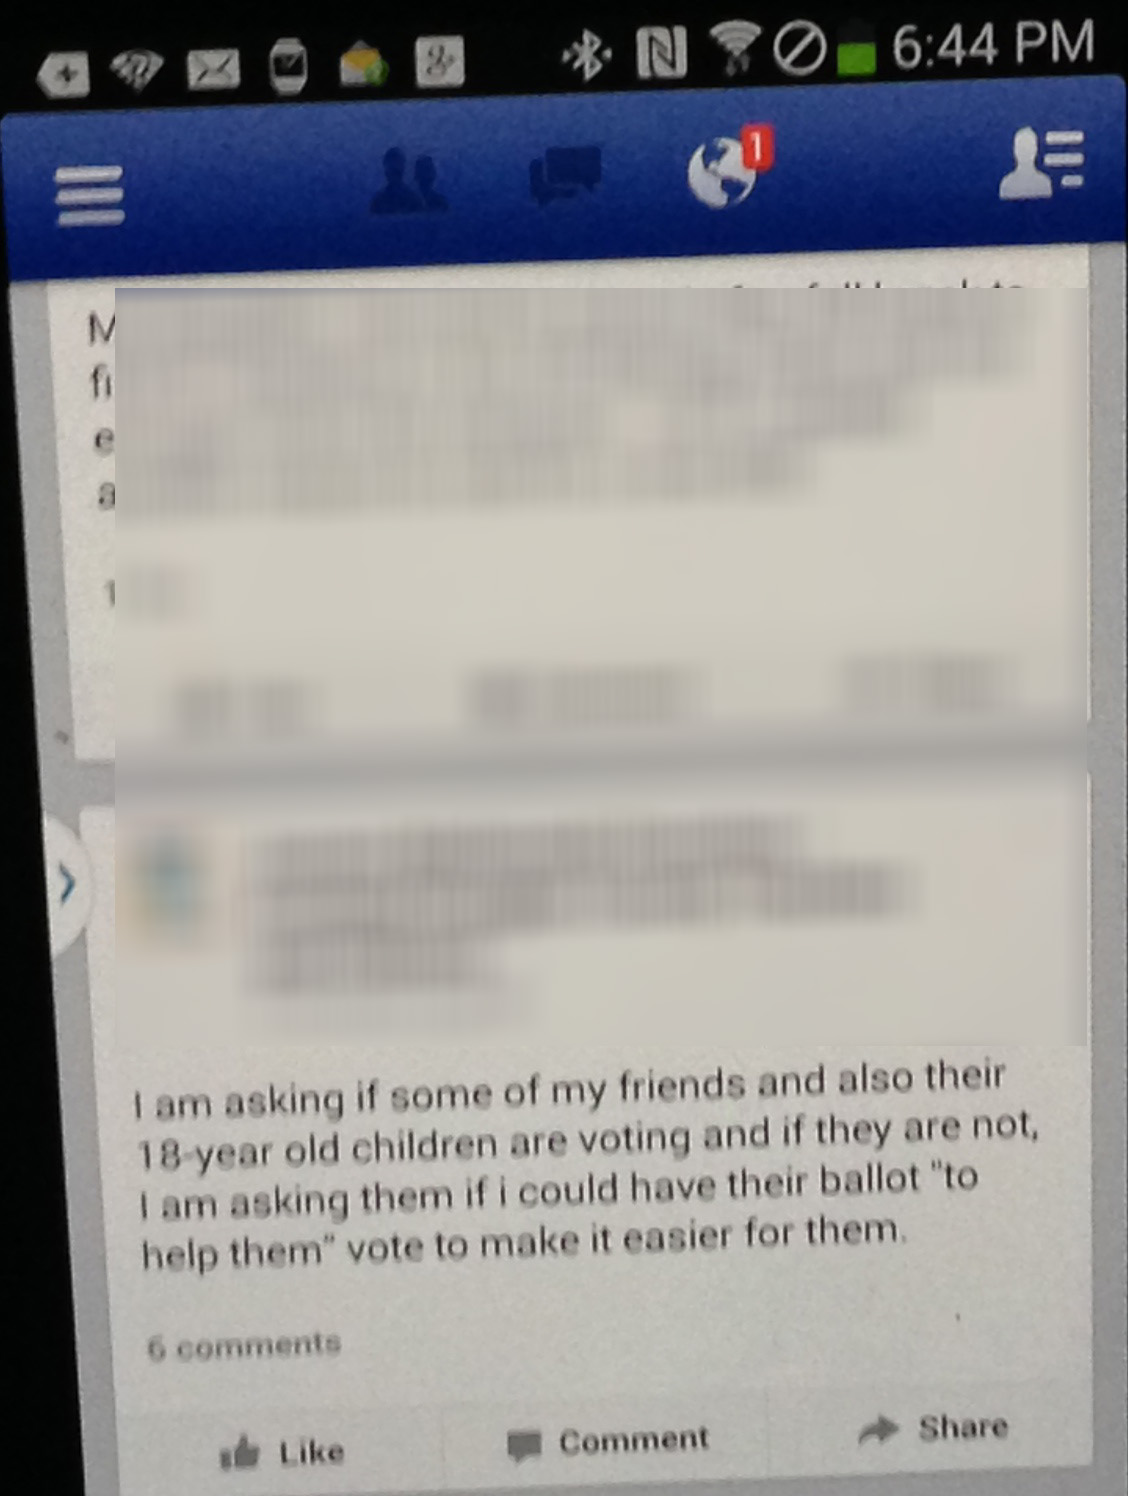 Facebook post asks for friends’ ballots if they are not voting